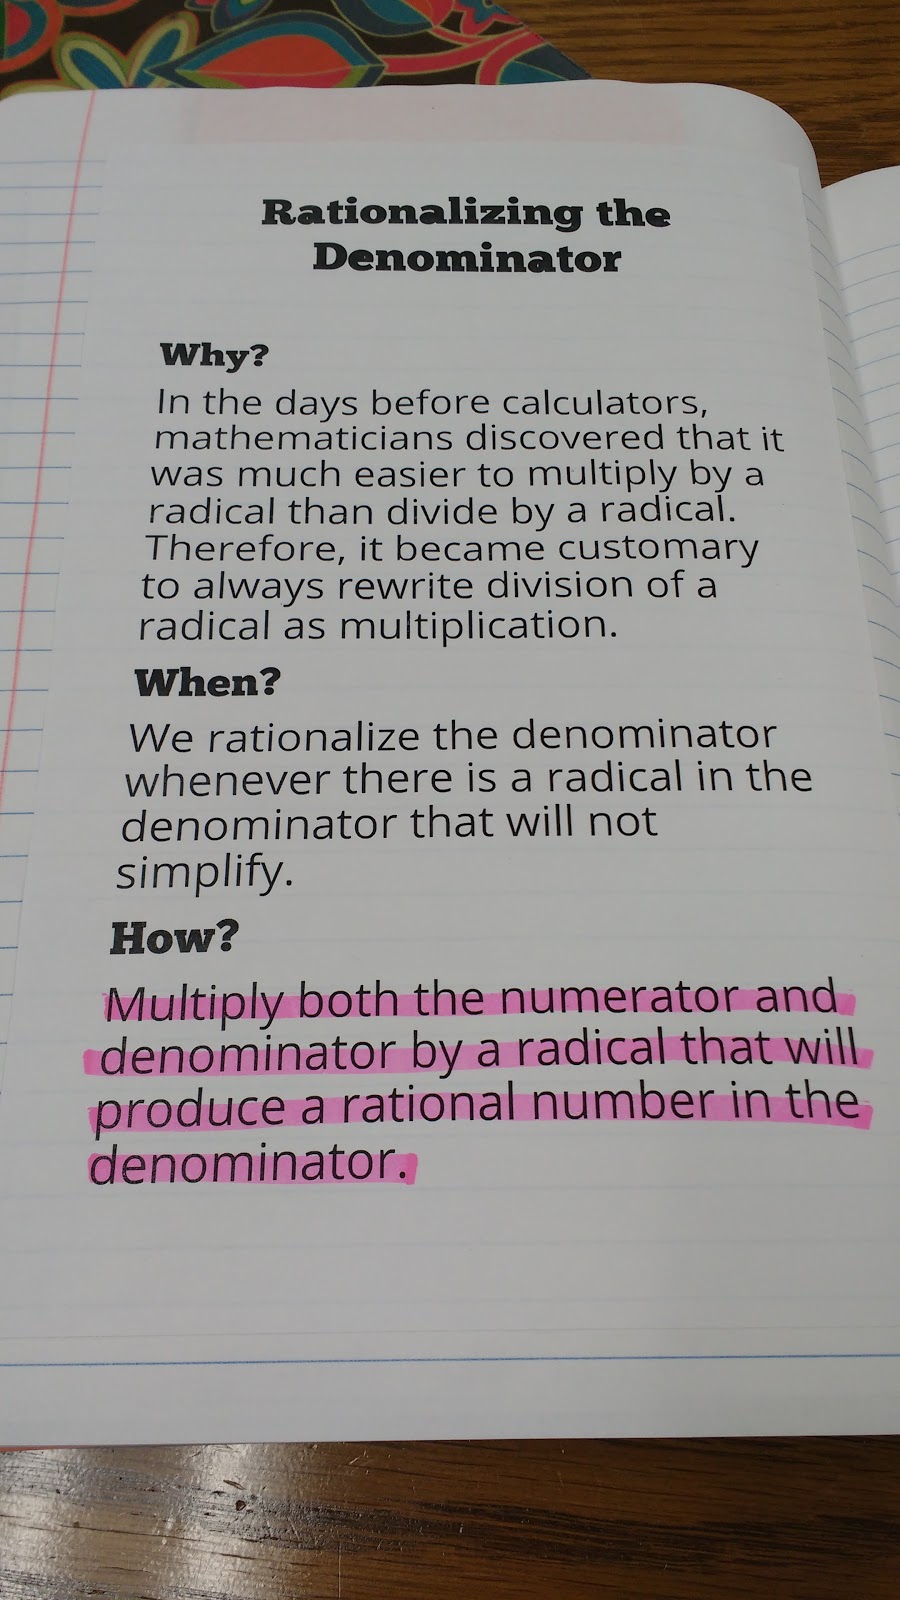 Why Do We Rationalize the Denominator Notes